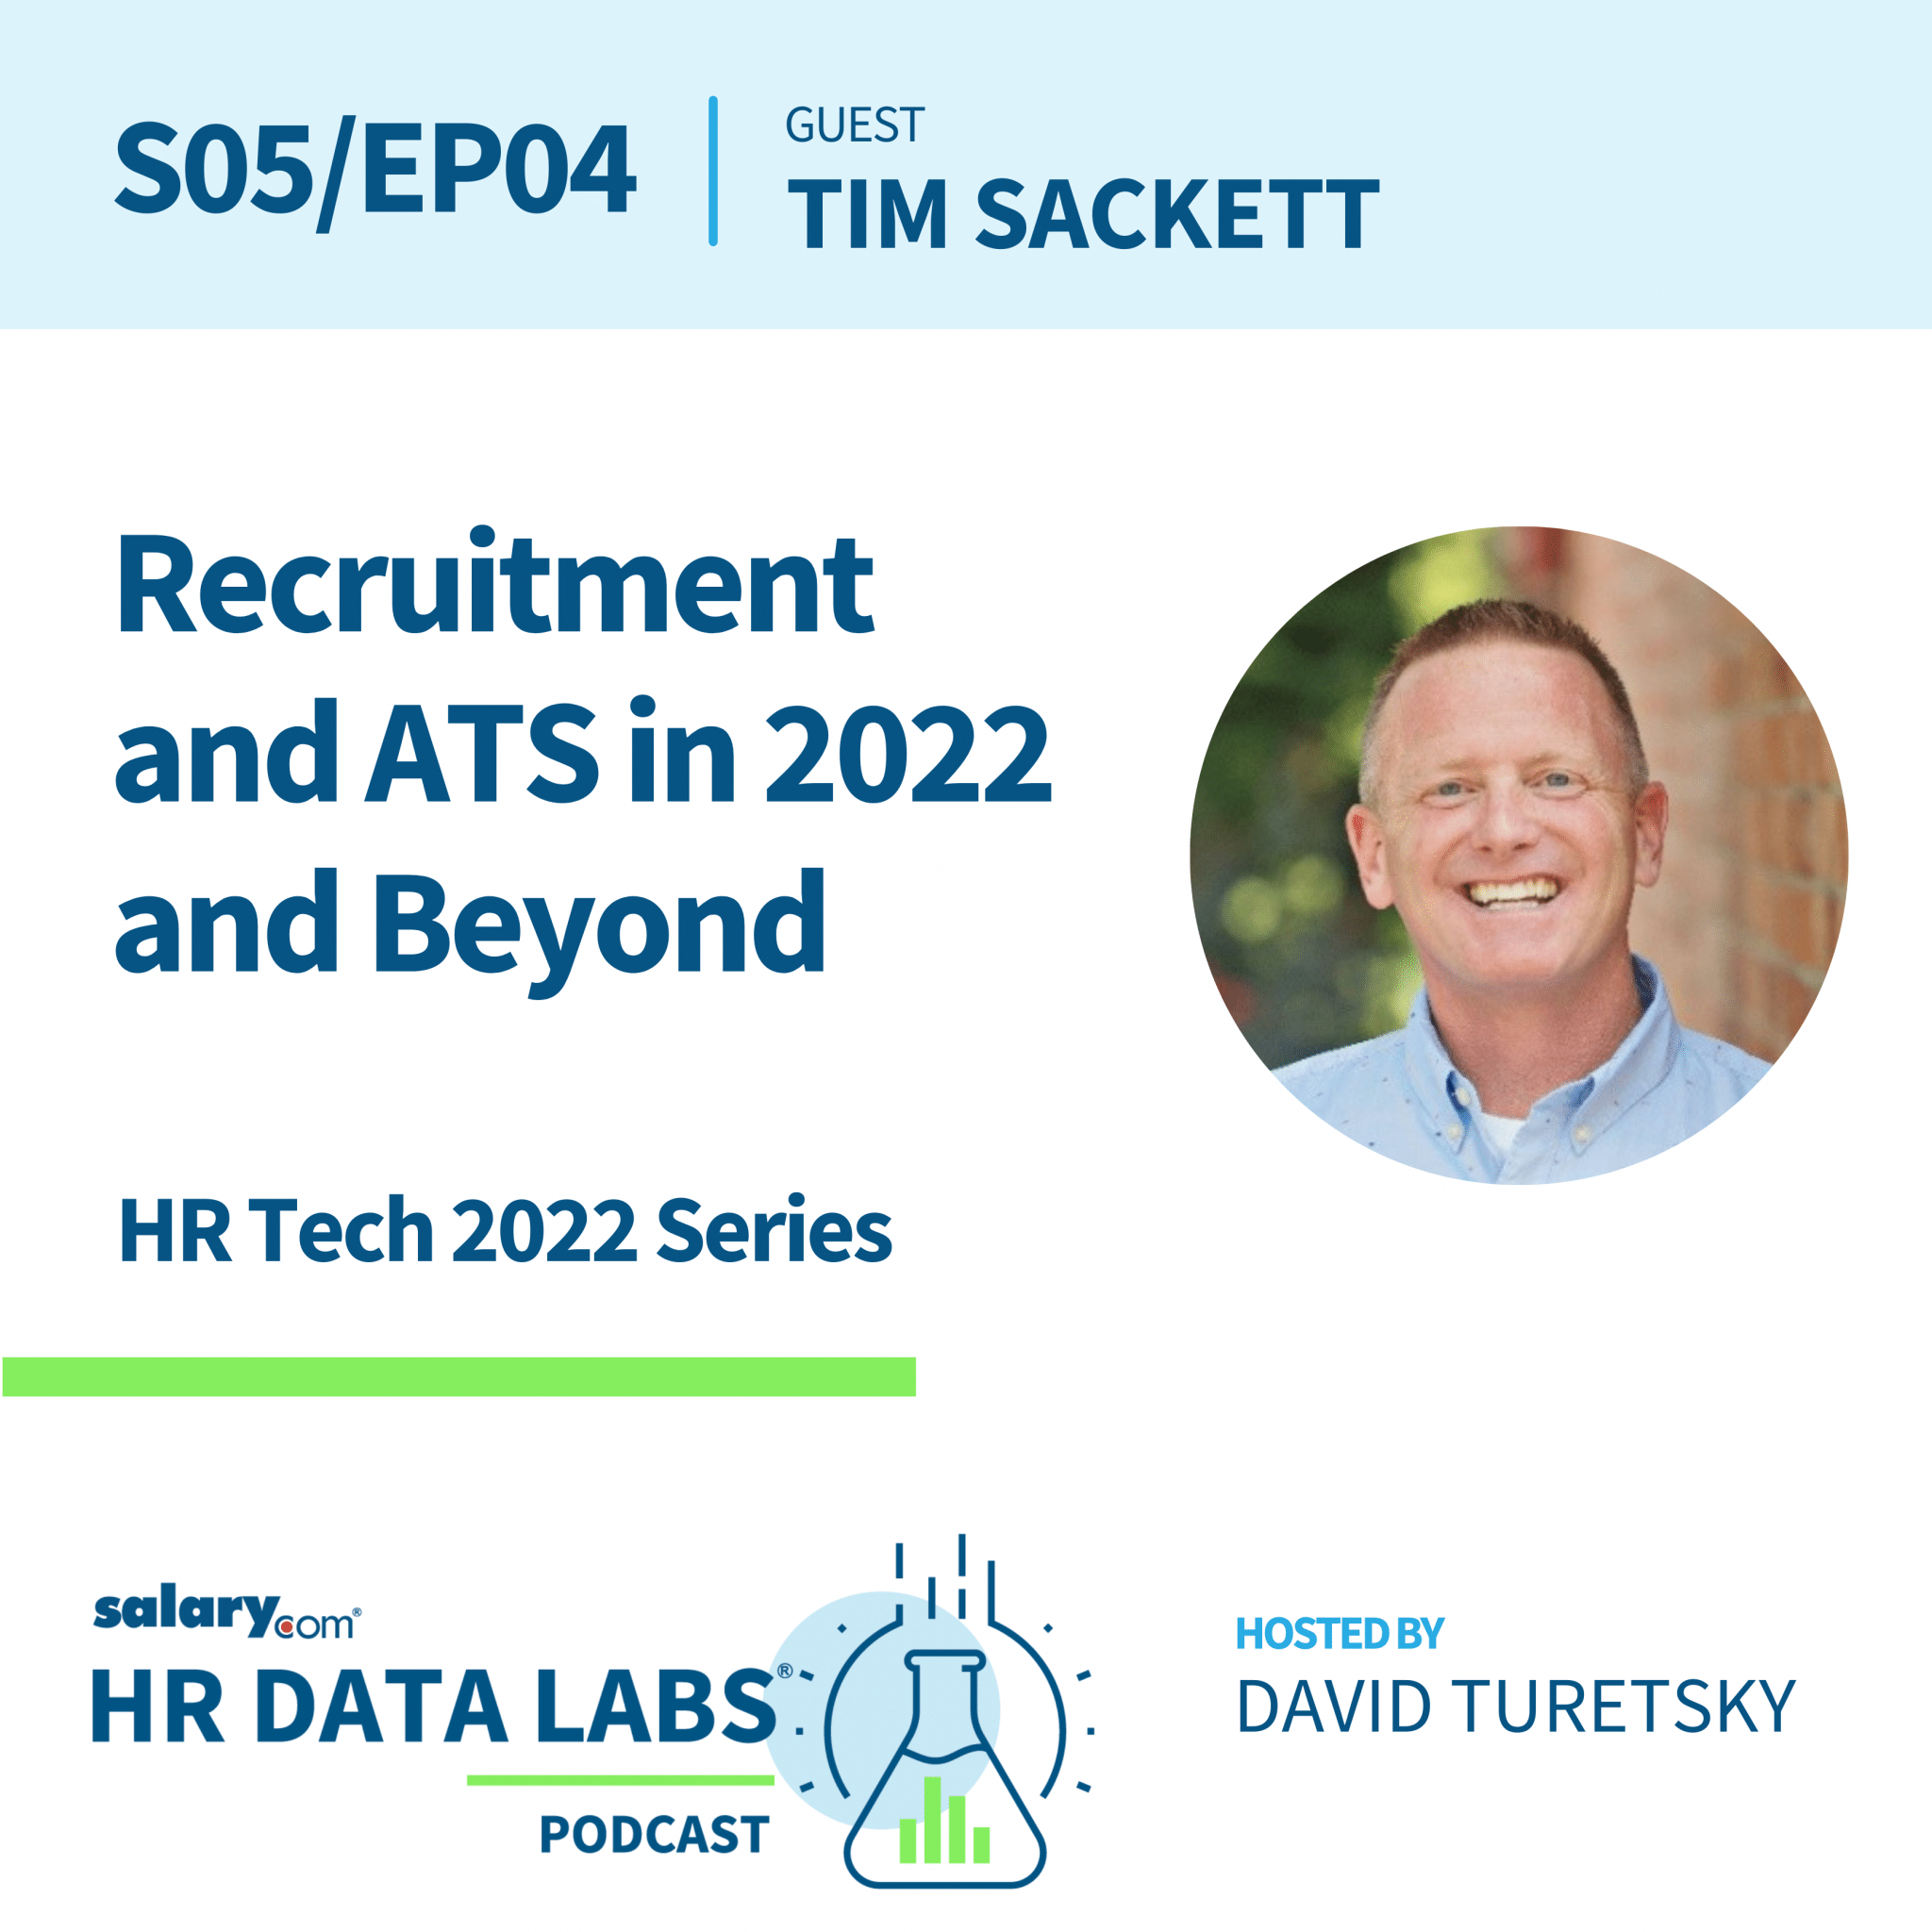 Tim Sackett – HR Tech 2022 Series – Recruitment and ATS in 2022 and Beyond